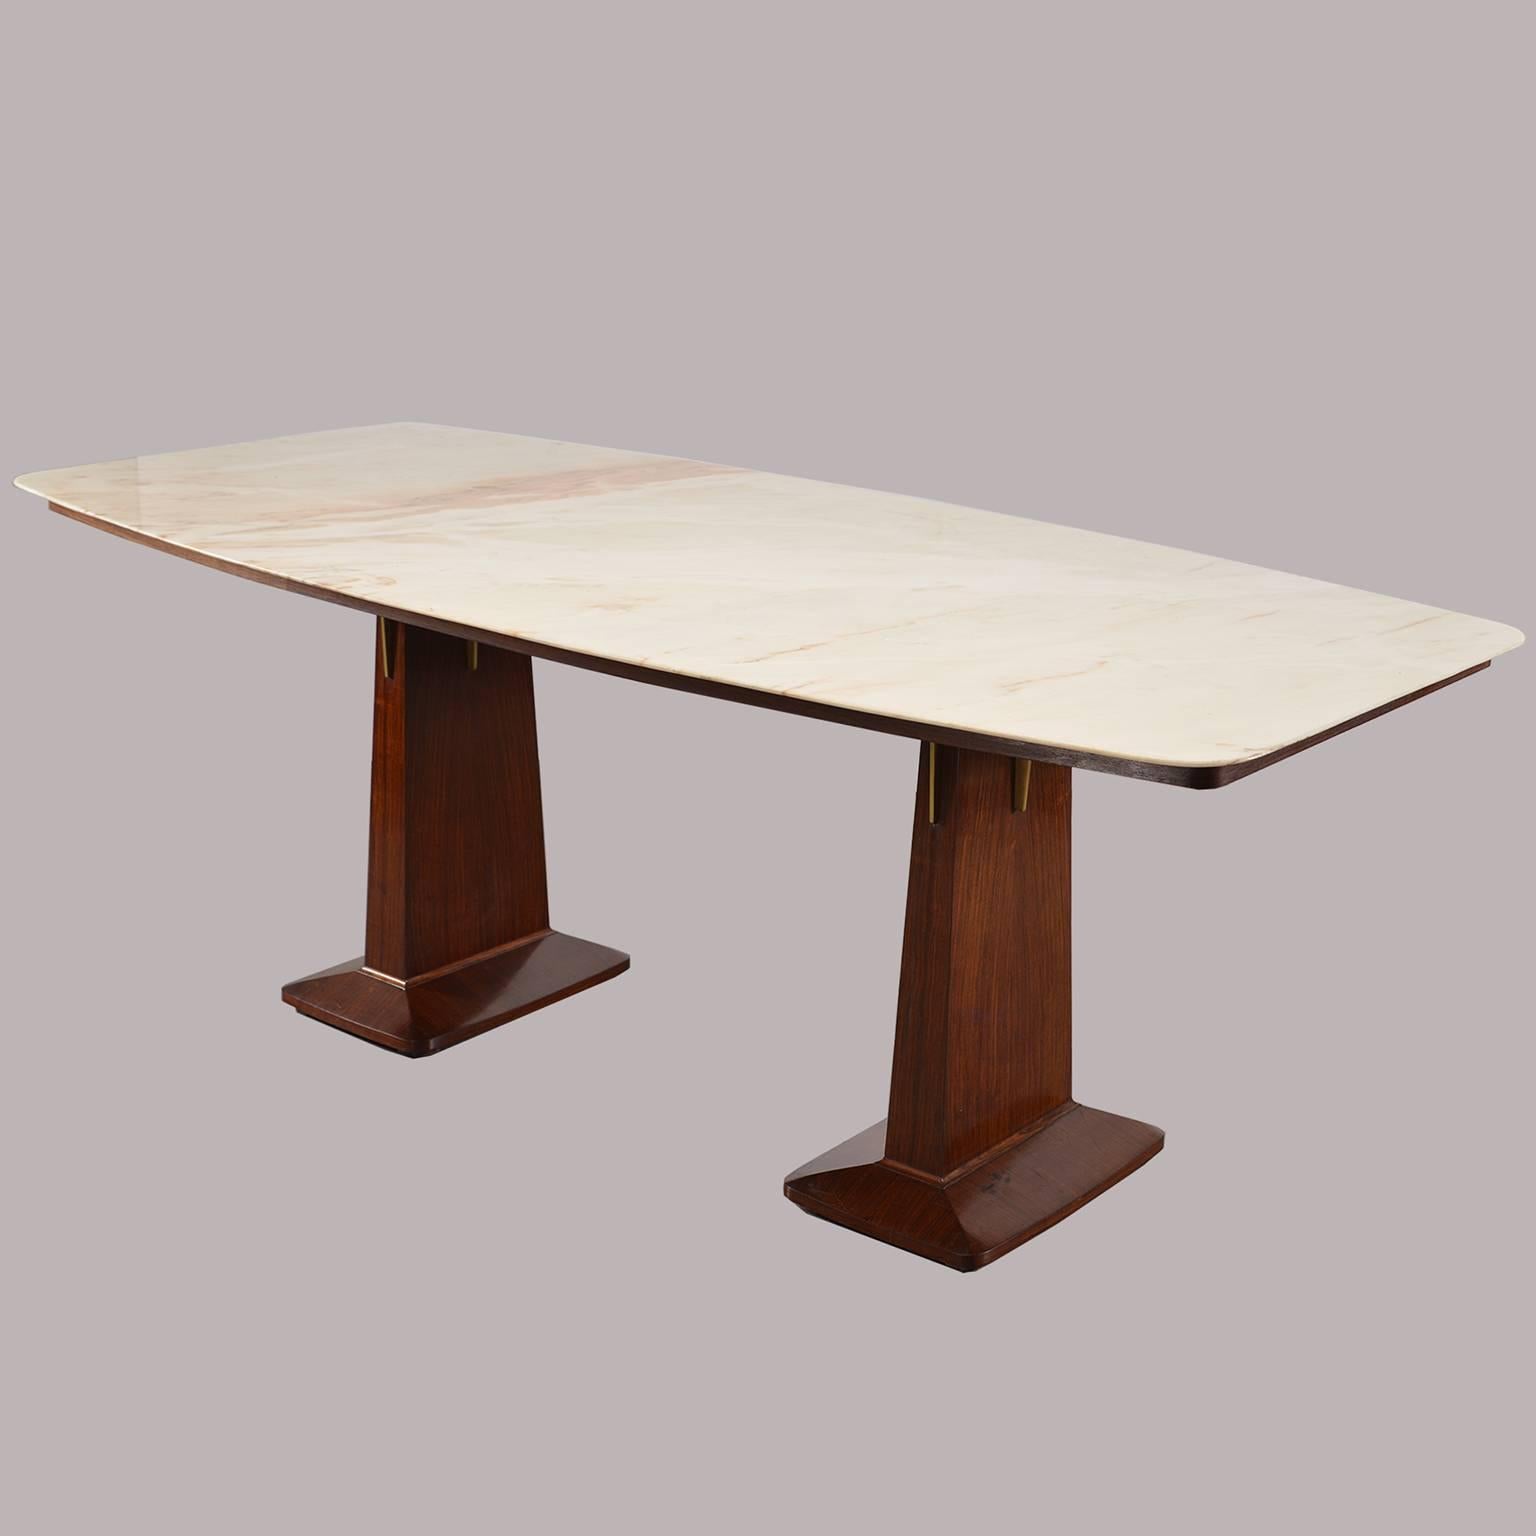 20th Century Italian Double Pedestal Table with Marble-Top in Style of Vittorio Dassi